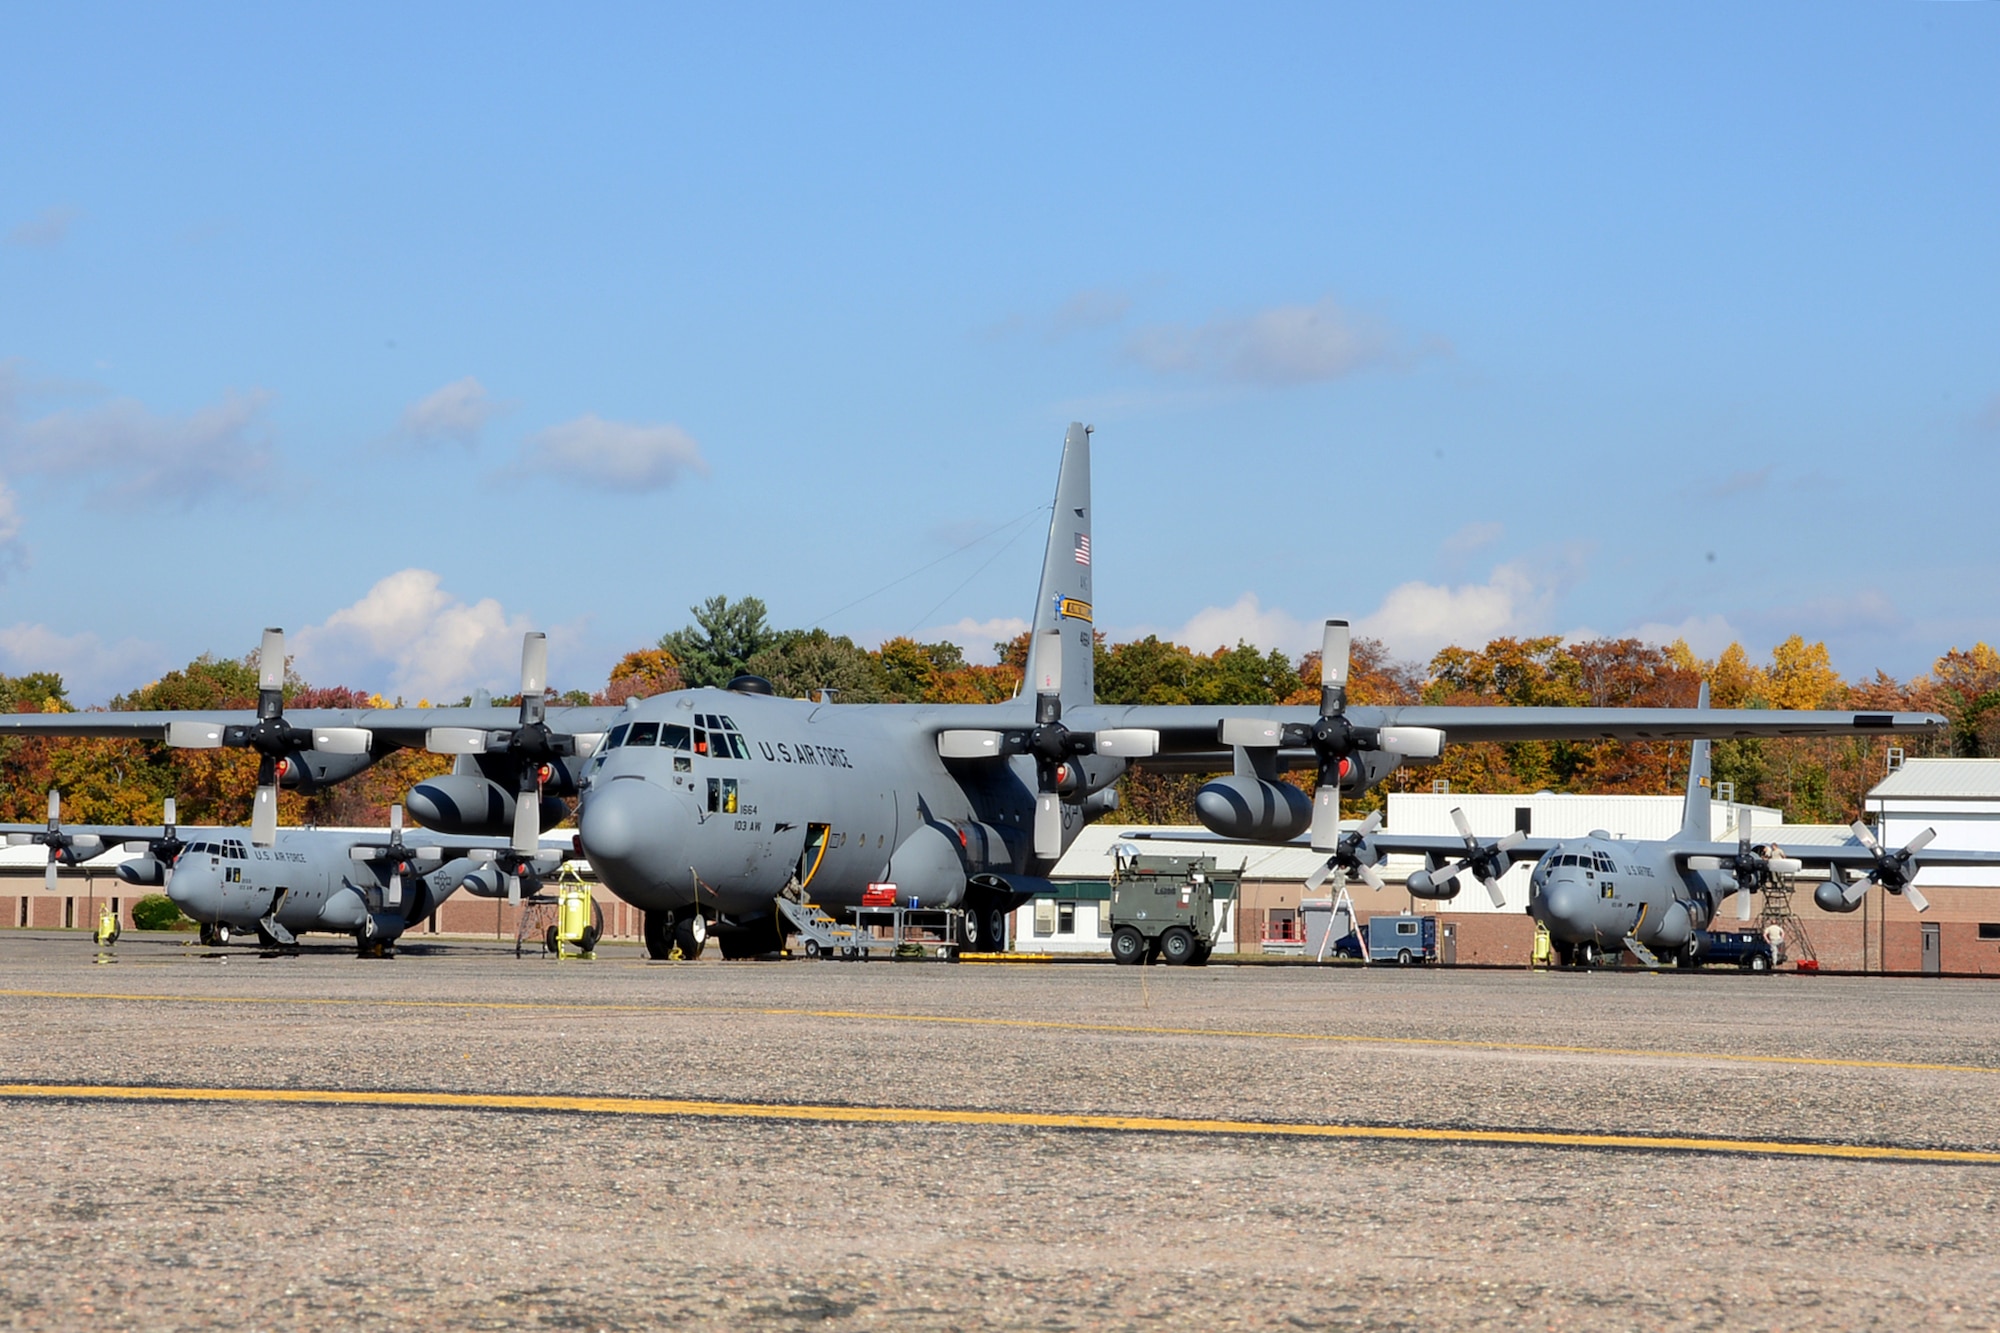 One year after the arrival of the first C-130H Hercules aircraft at Bradley Air National Guard Base, East Granby, Conn., a full fleet of aircraft adds color to the fall flightline, Friday, October 17, 2014.  The Flying Yankees' acceptance of the final of eight aircraft assigned to the 103rd Airlift Wing, Wednesday, October 15, 2014, marks an important milestone in the unit's conversion to the C-130 mission.  (U.S. Air National Guard photo by Master Sgt Erin McNamara)